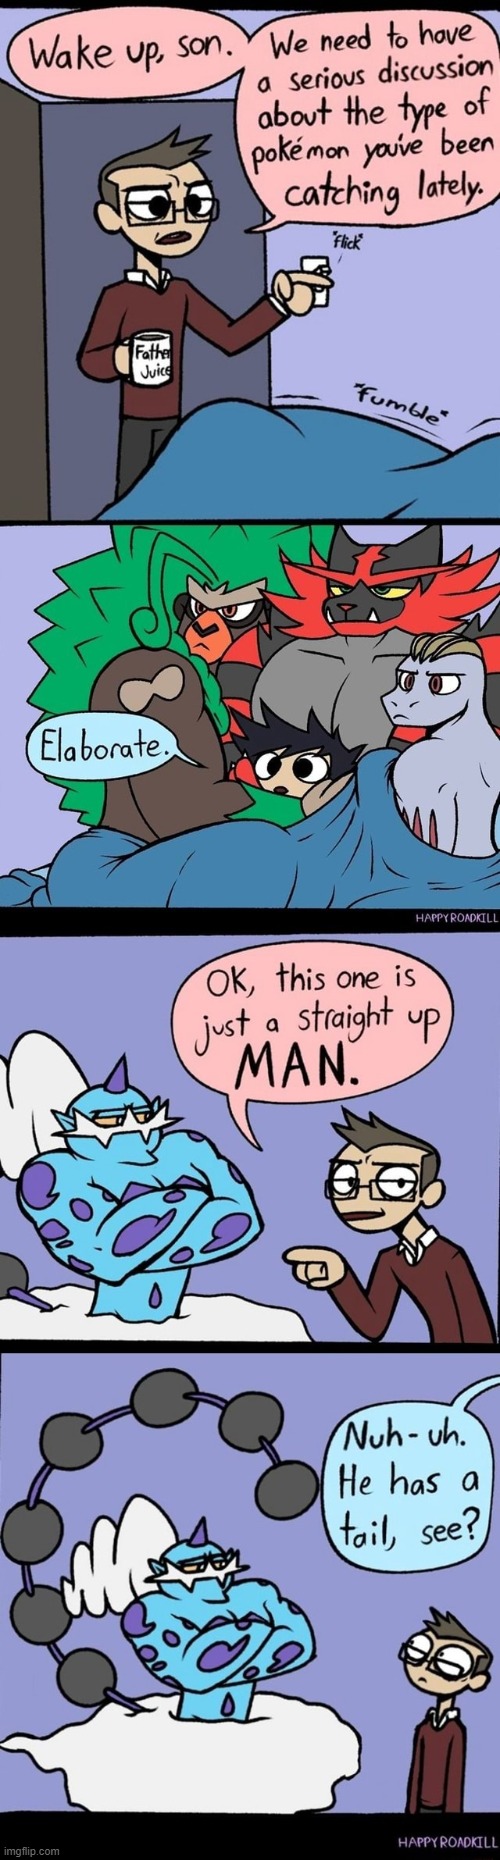 That's... Uh... Very interesting tail. | image tagged in memes,funny,comics/cartoons,pokemon,gaymer | made w/ Imgflip meme maker